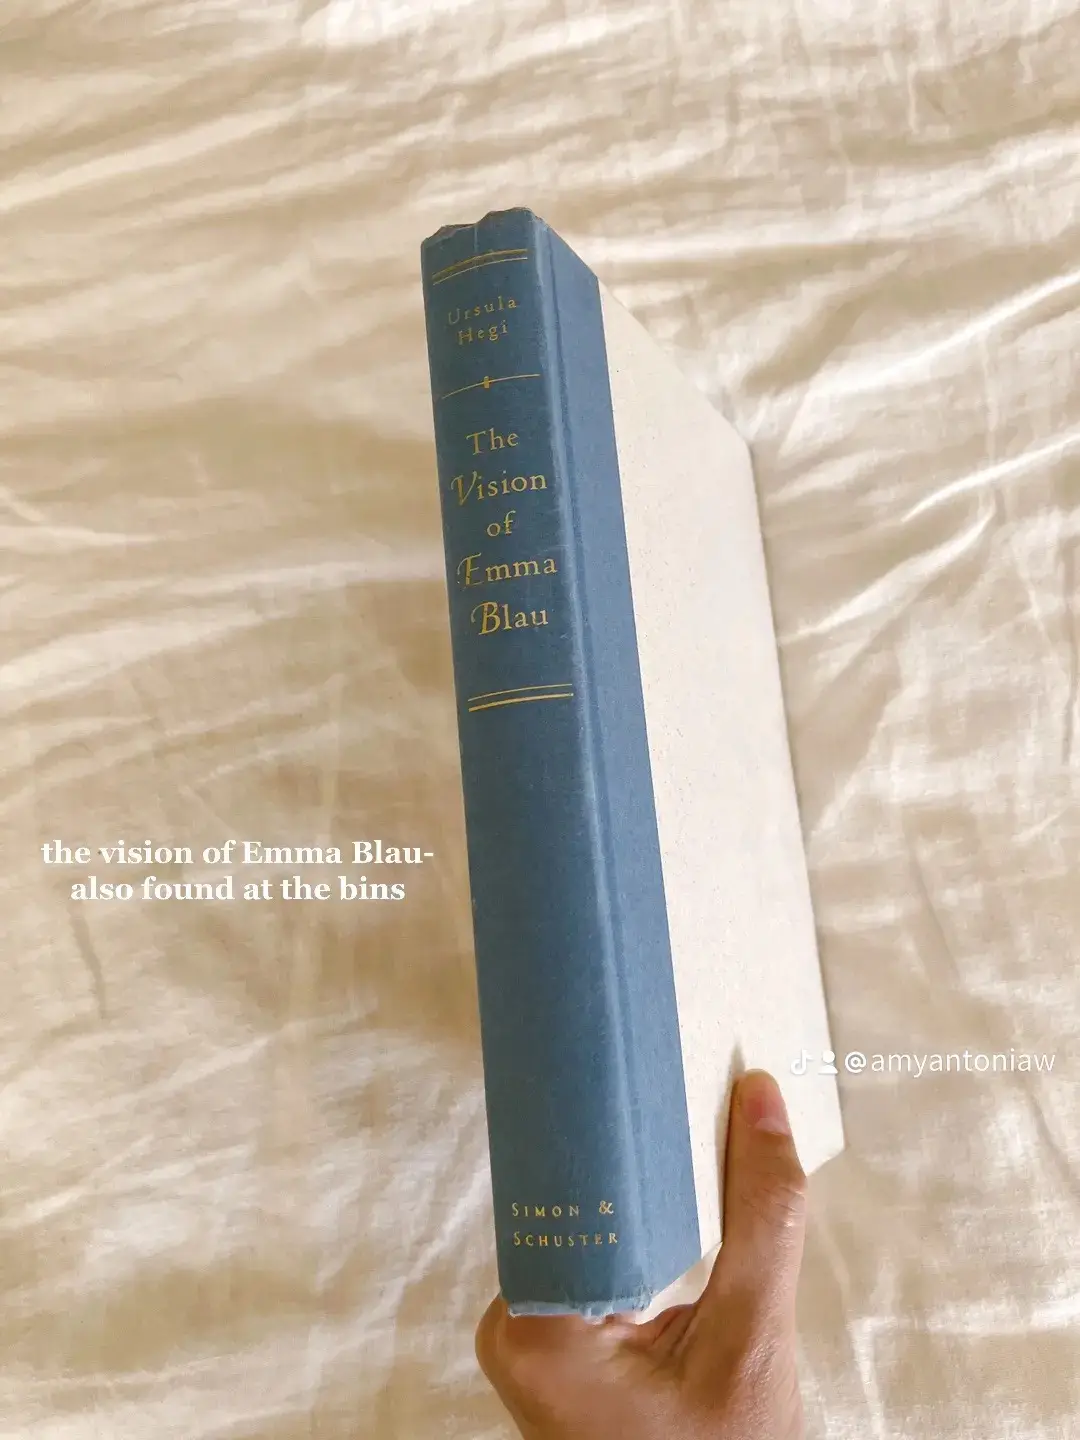  A person is holding a book titled The Vision of Emma Blau.